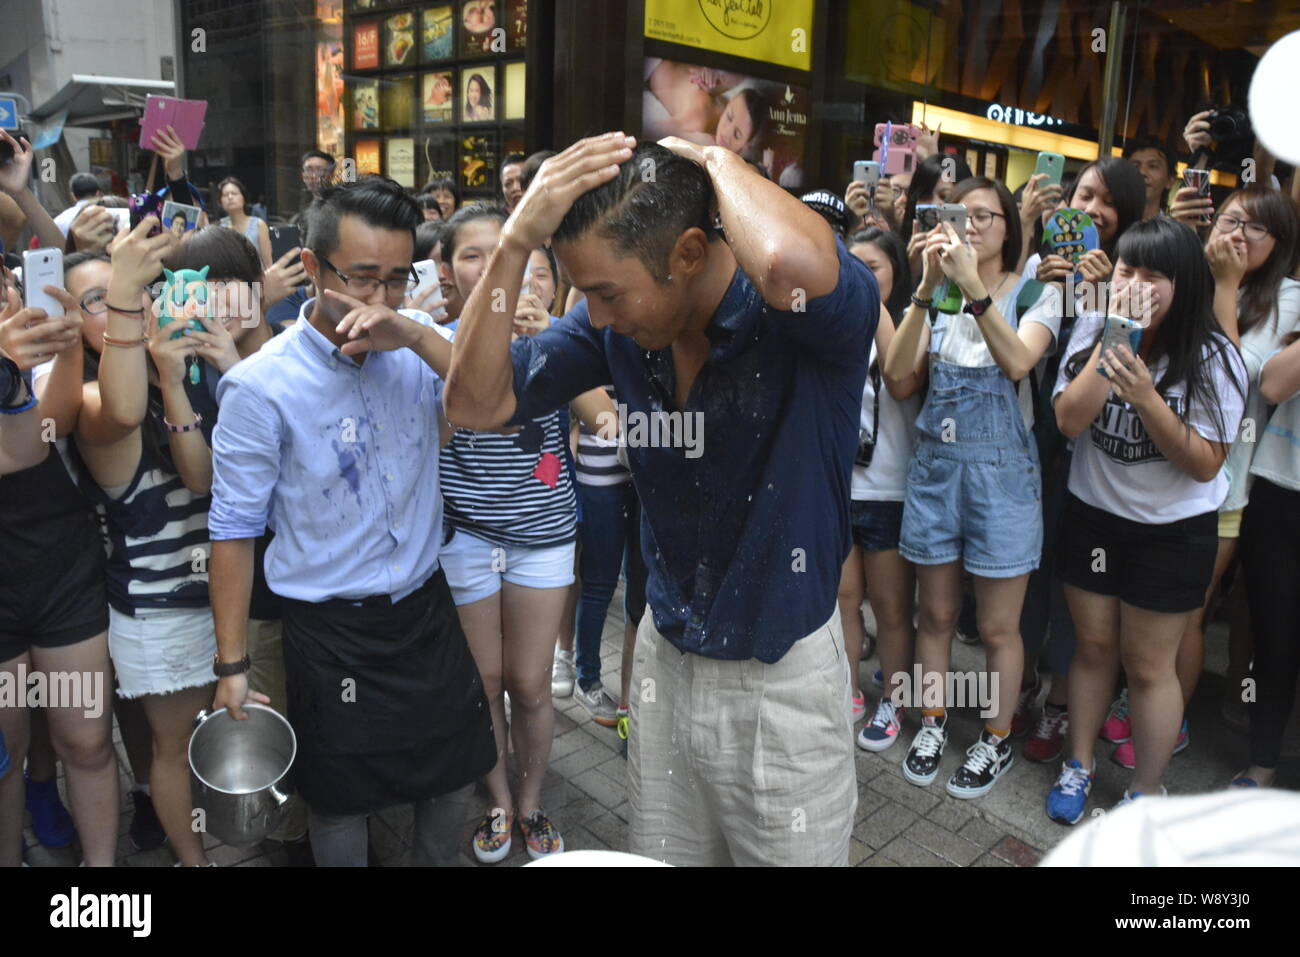 Choi Siwon of South Korean pop group Super Junior, front, gets soaked after braving the Ice Bucket Challenge in Central, Hong Kong, China, 18 August 2 Stock Photo